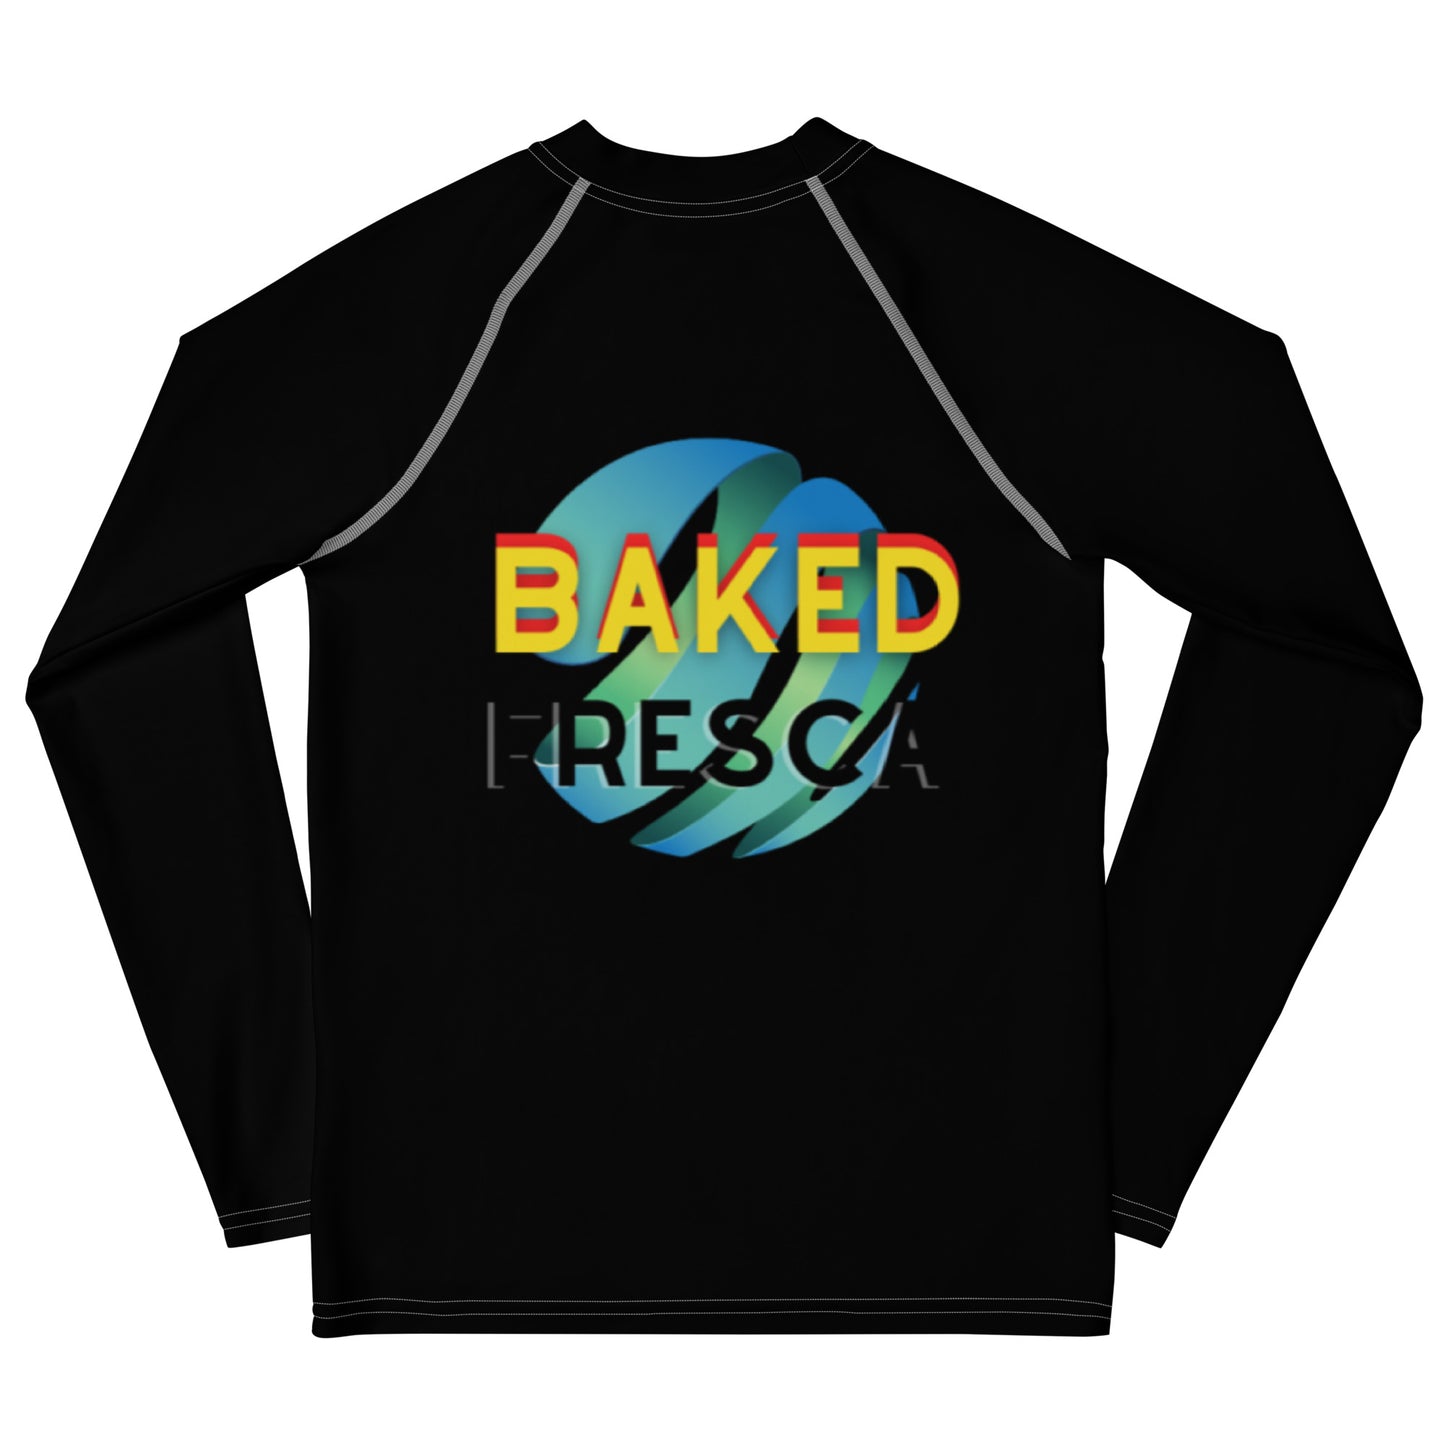 Simplicity Black Youth Rash Guard by Baked Fresca